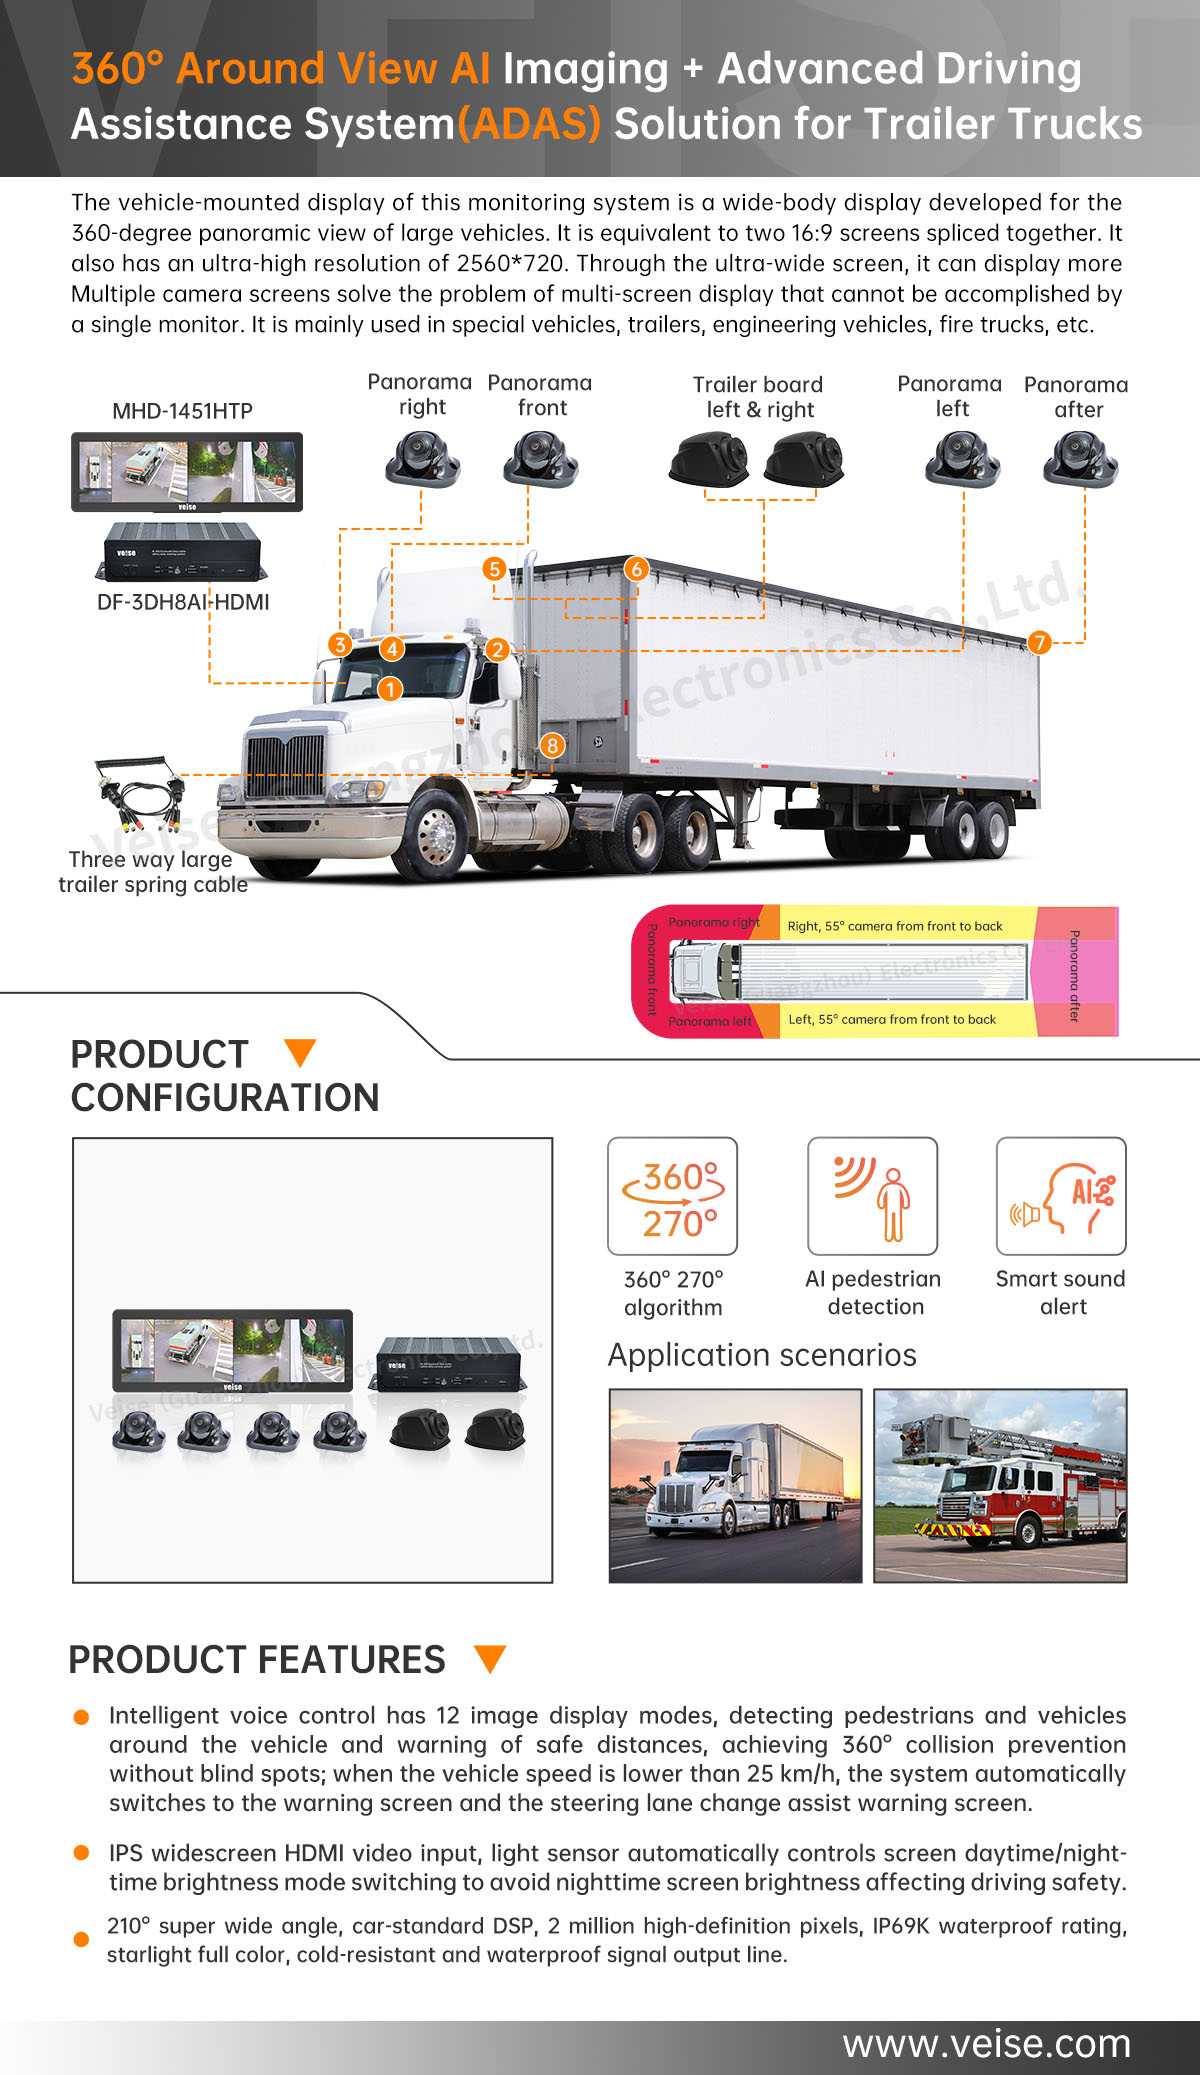 360° Around View AI Imaging + Advanced Driving Assistance System(ADAS) Solution for Trailer Trucks